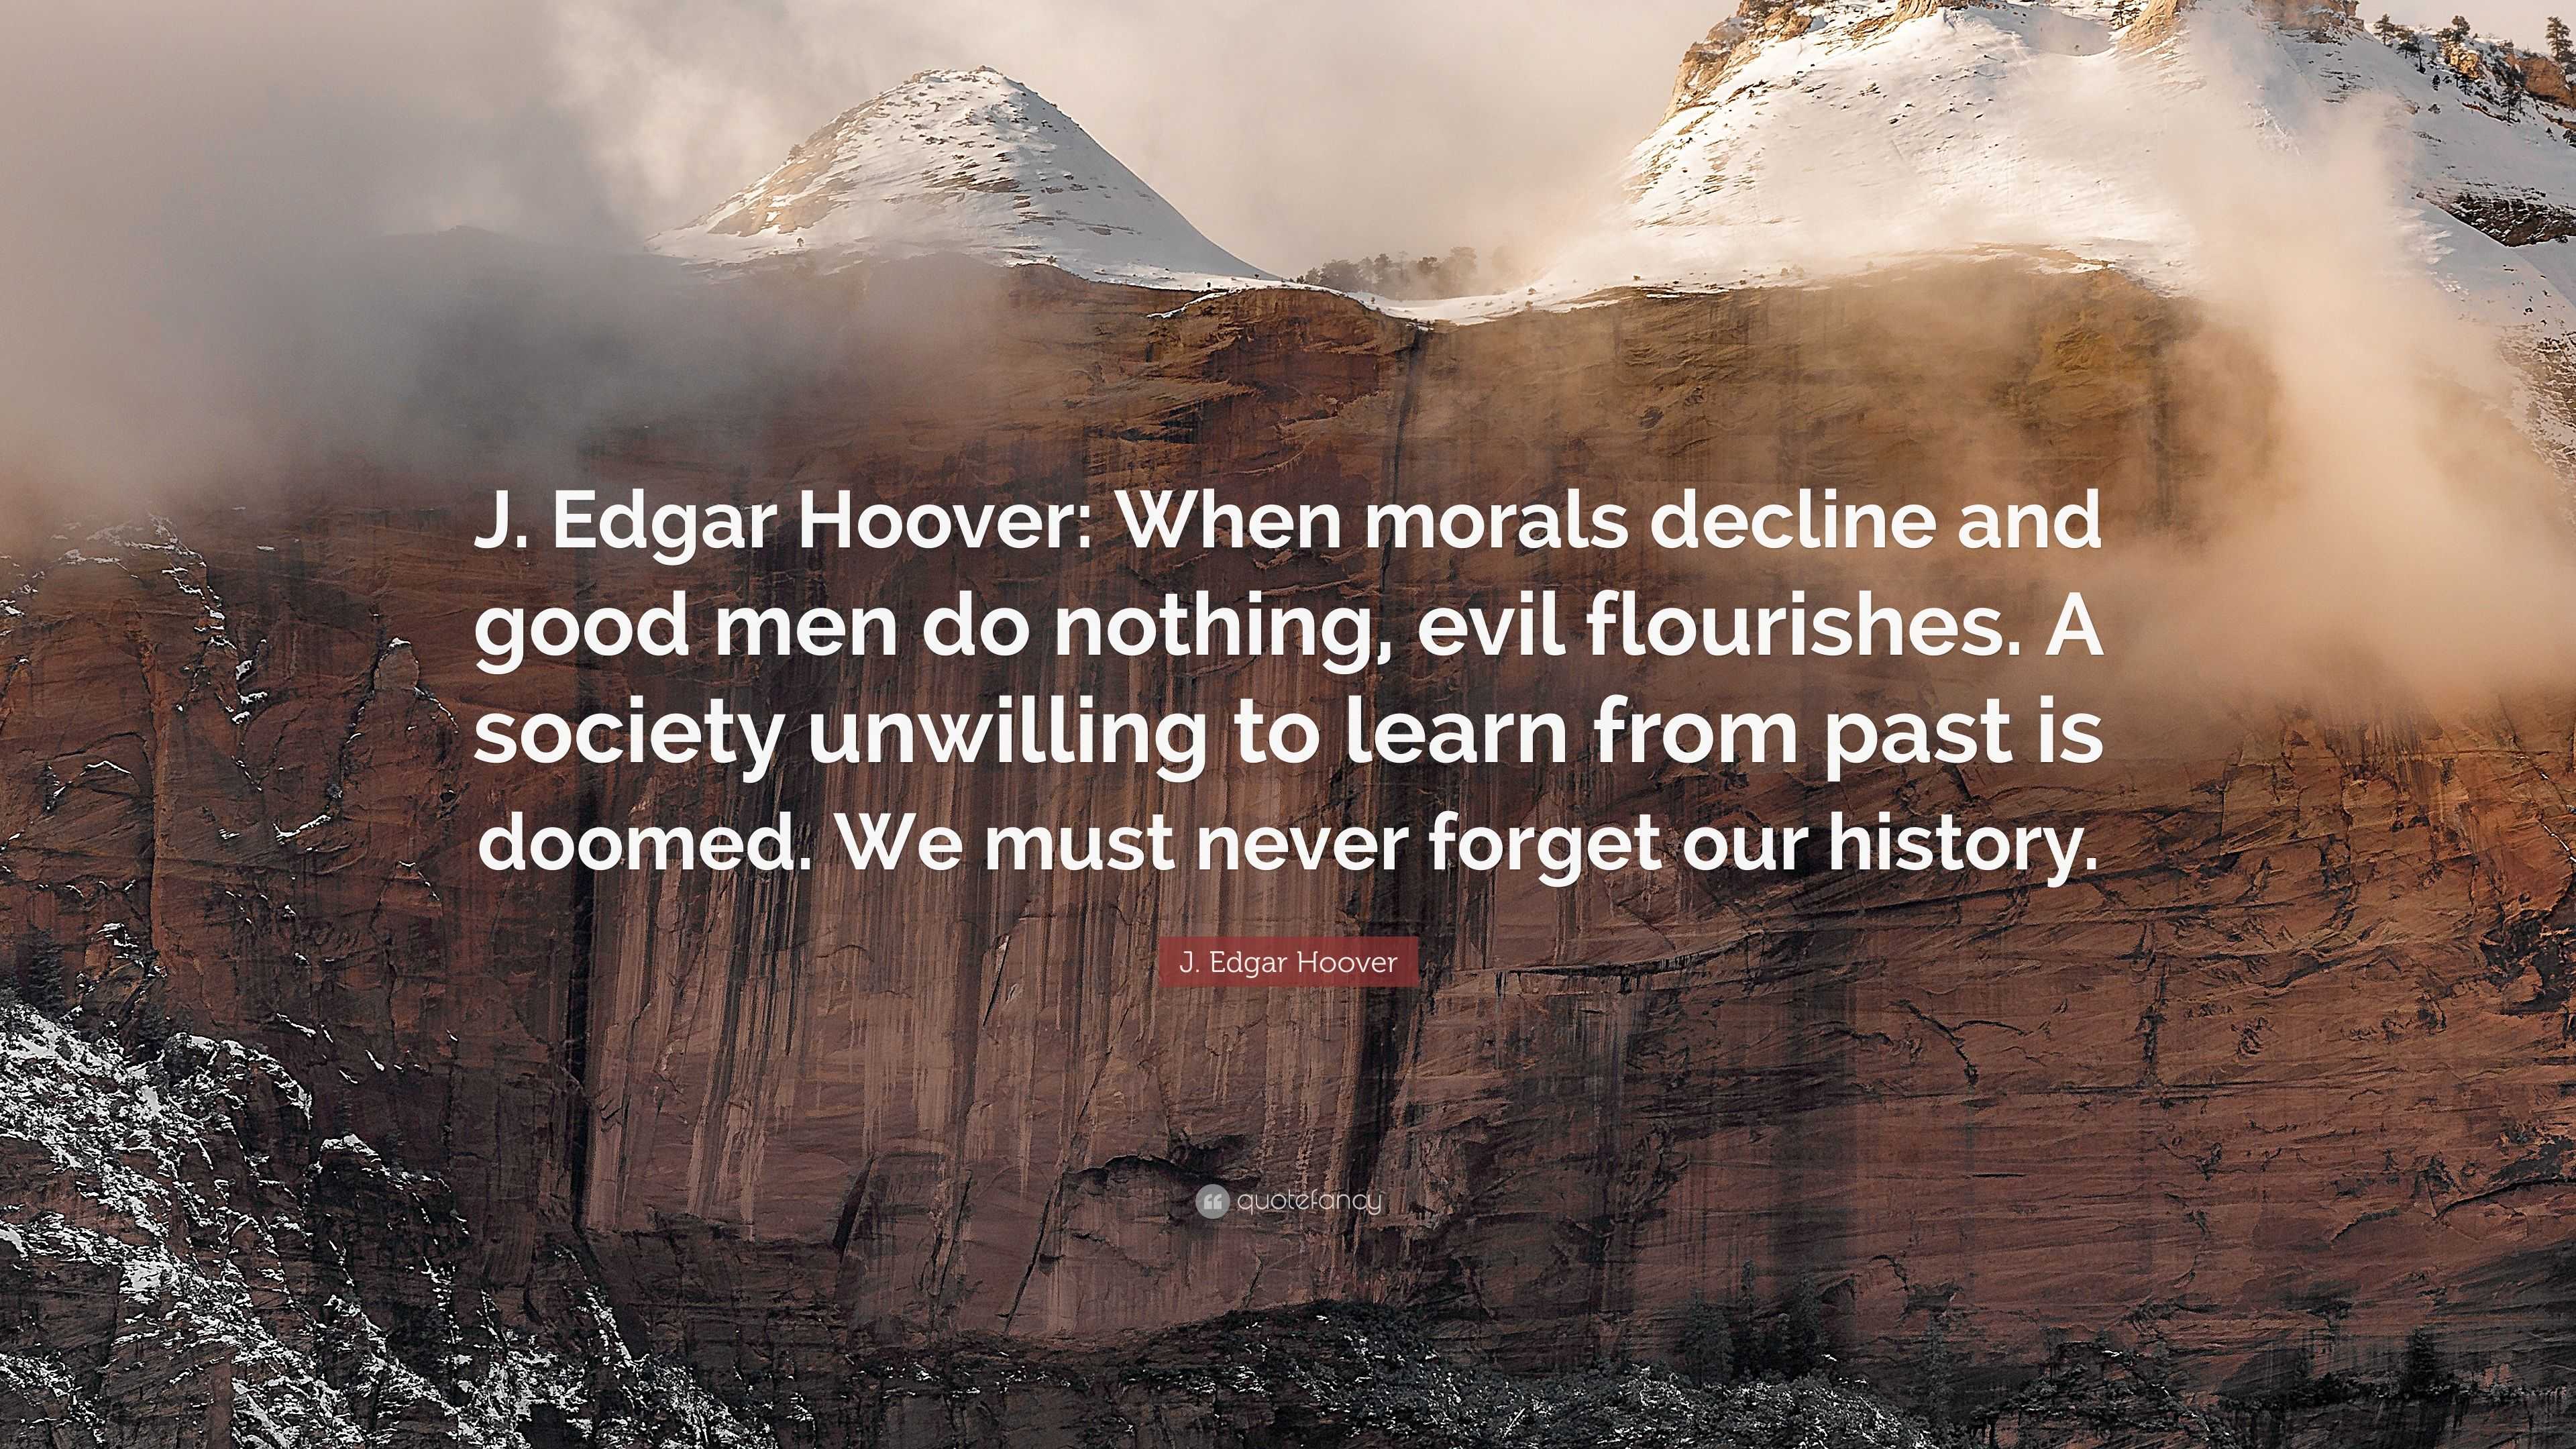 J. Edgar Hoover Quote: “J. Edgar Hoover: When morals decline and good